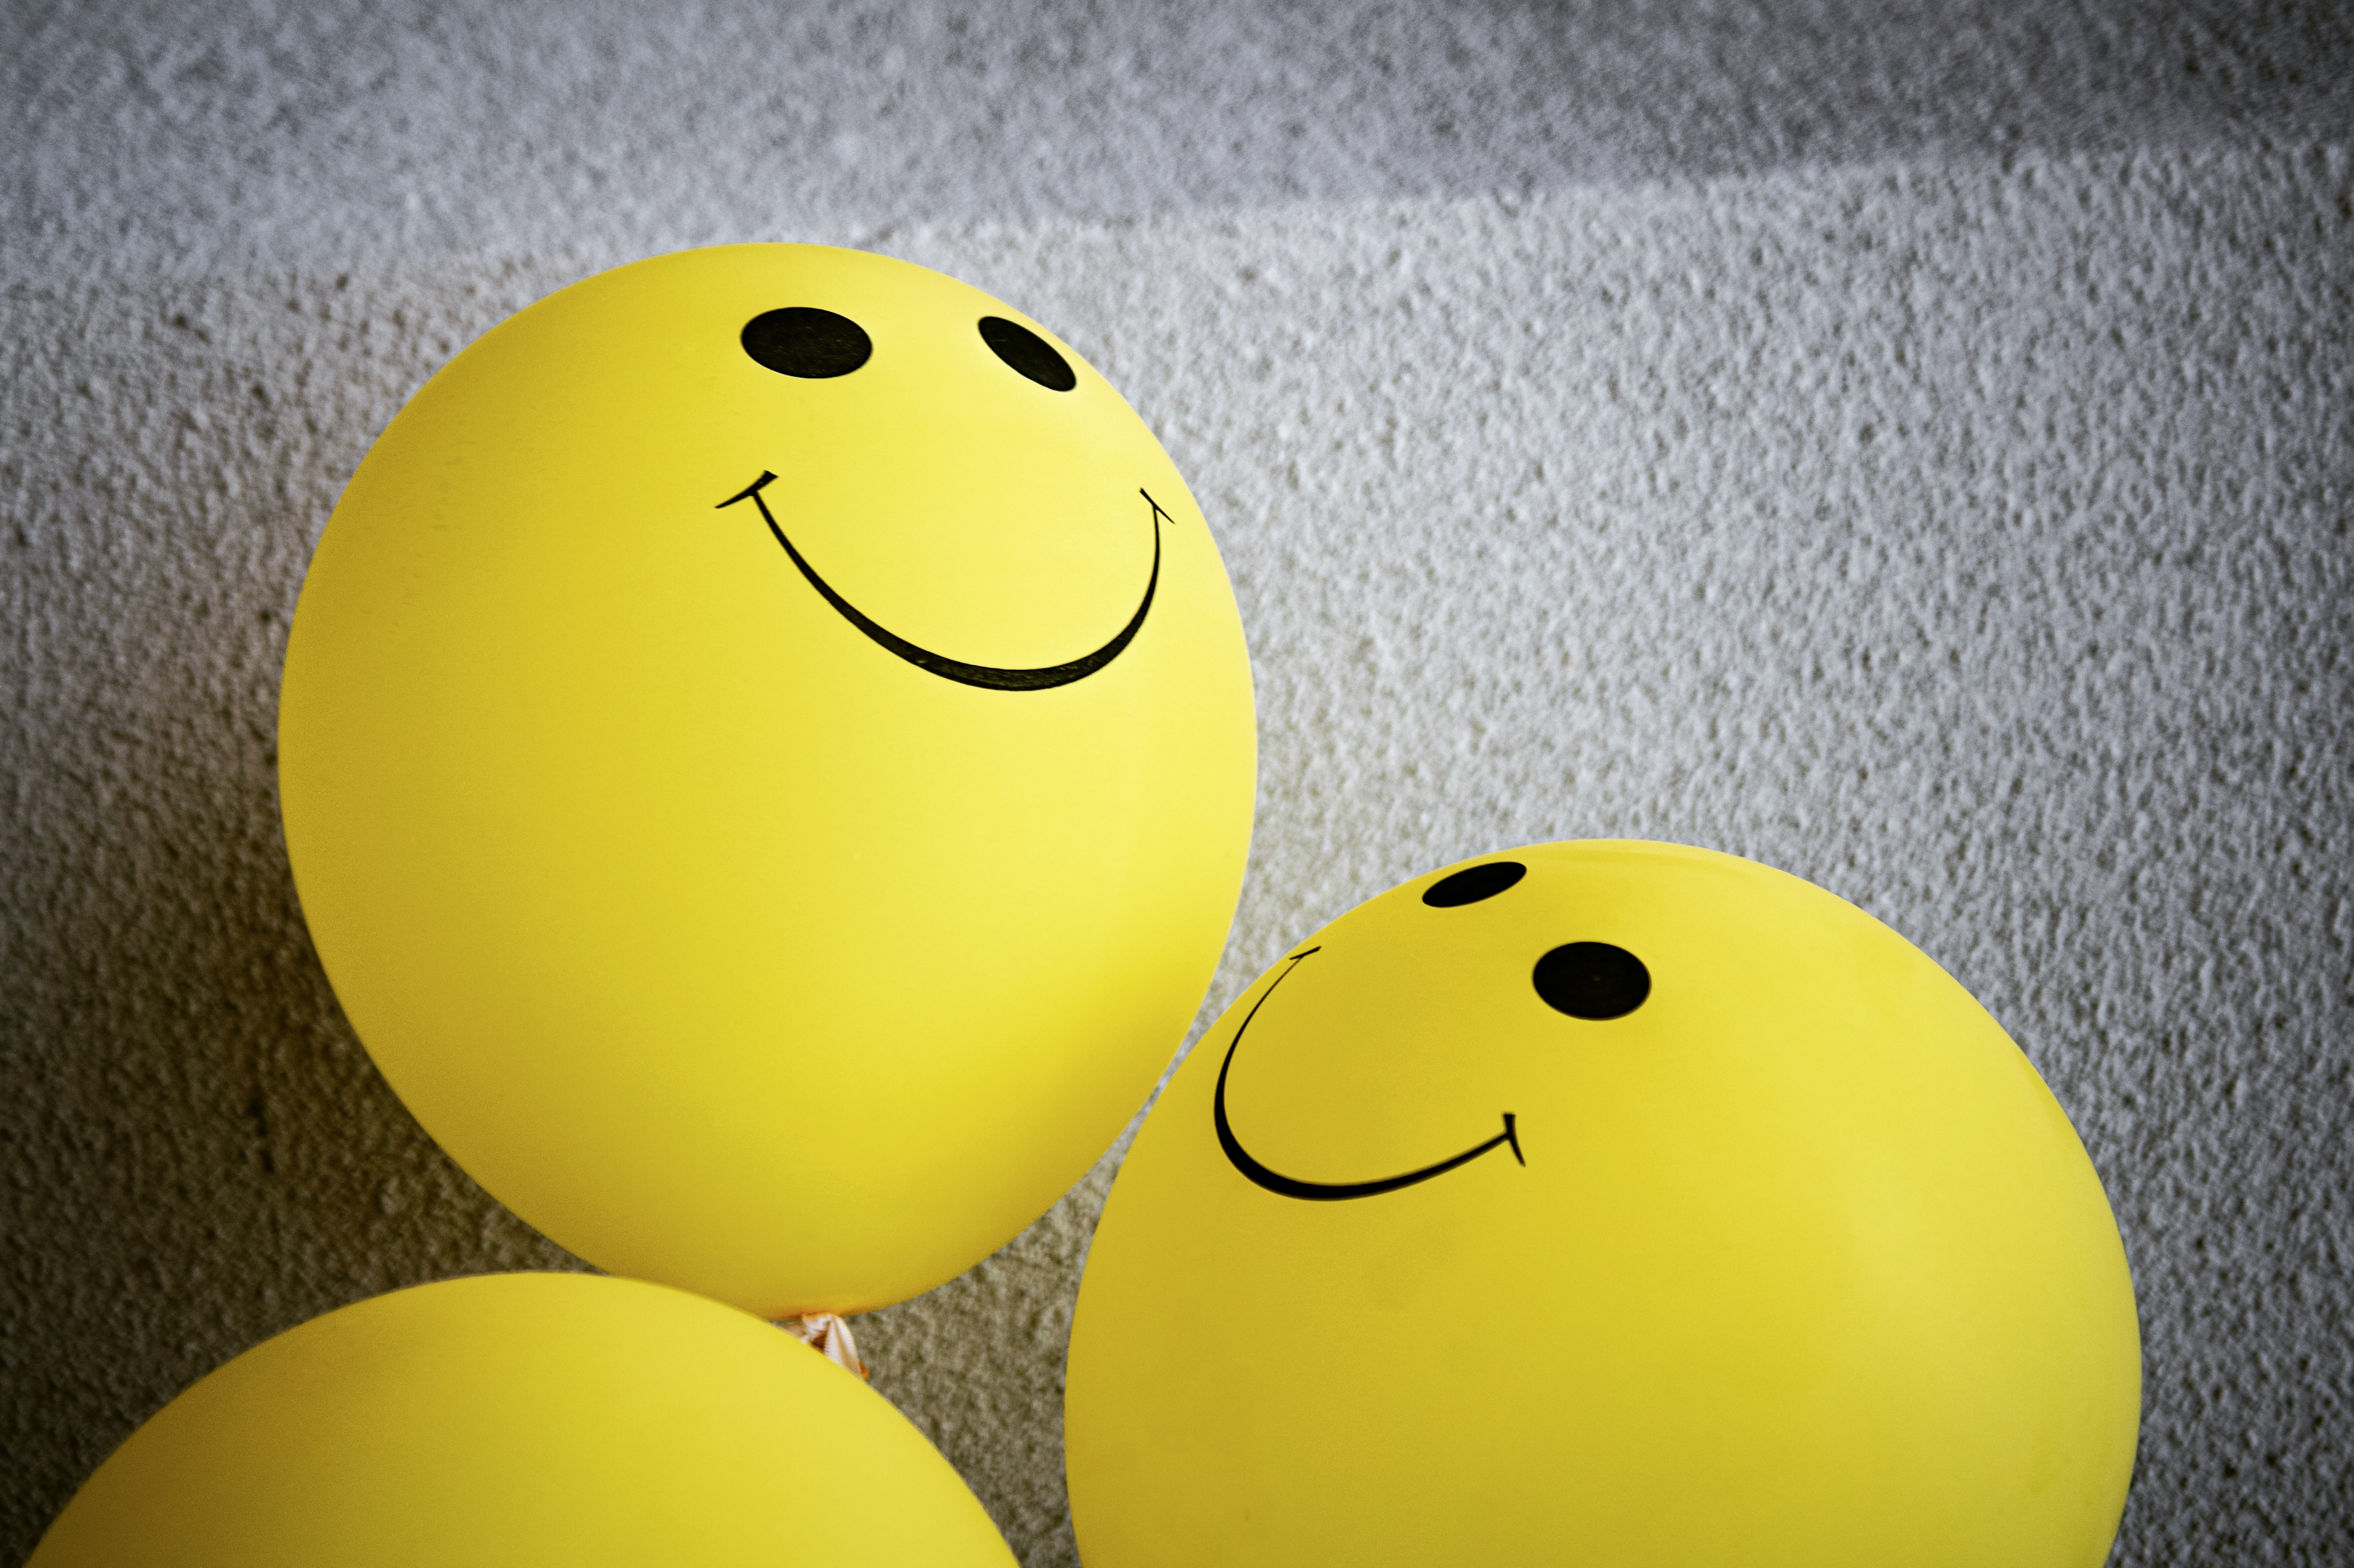 Two happy, yellow ballons with smiling faces.